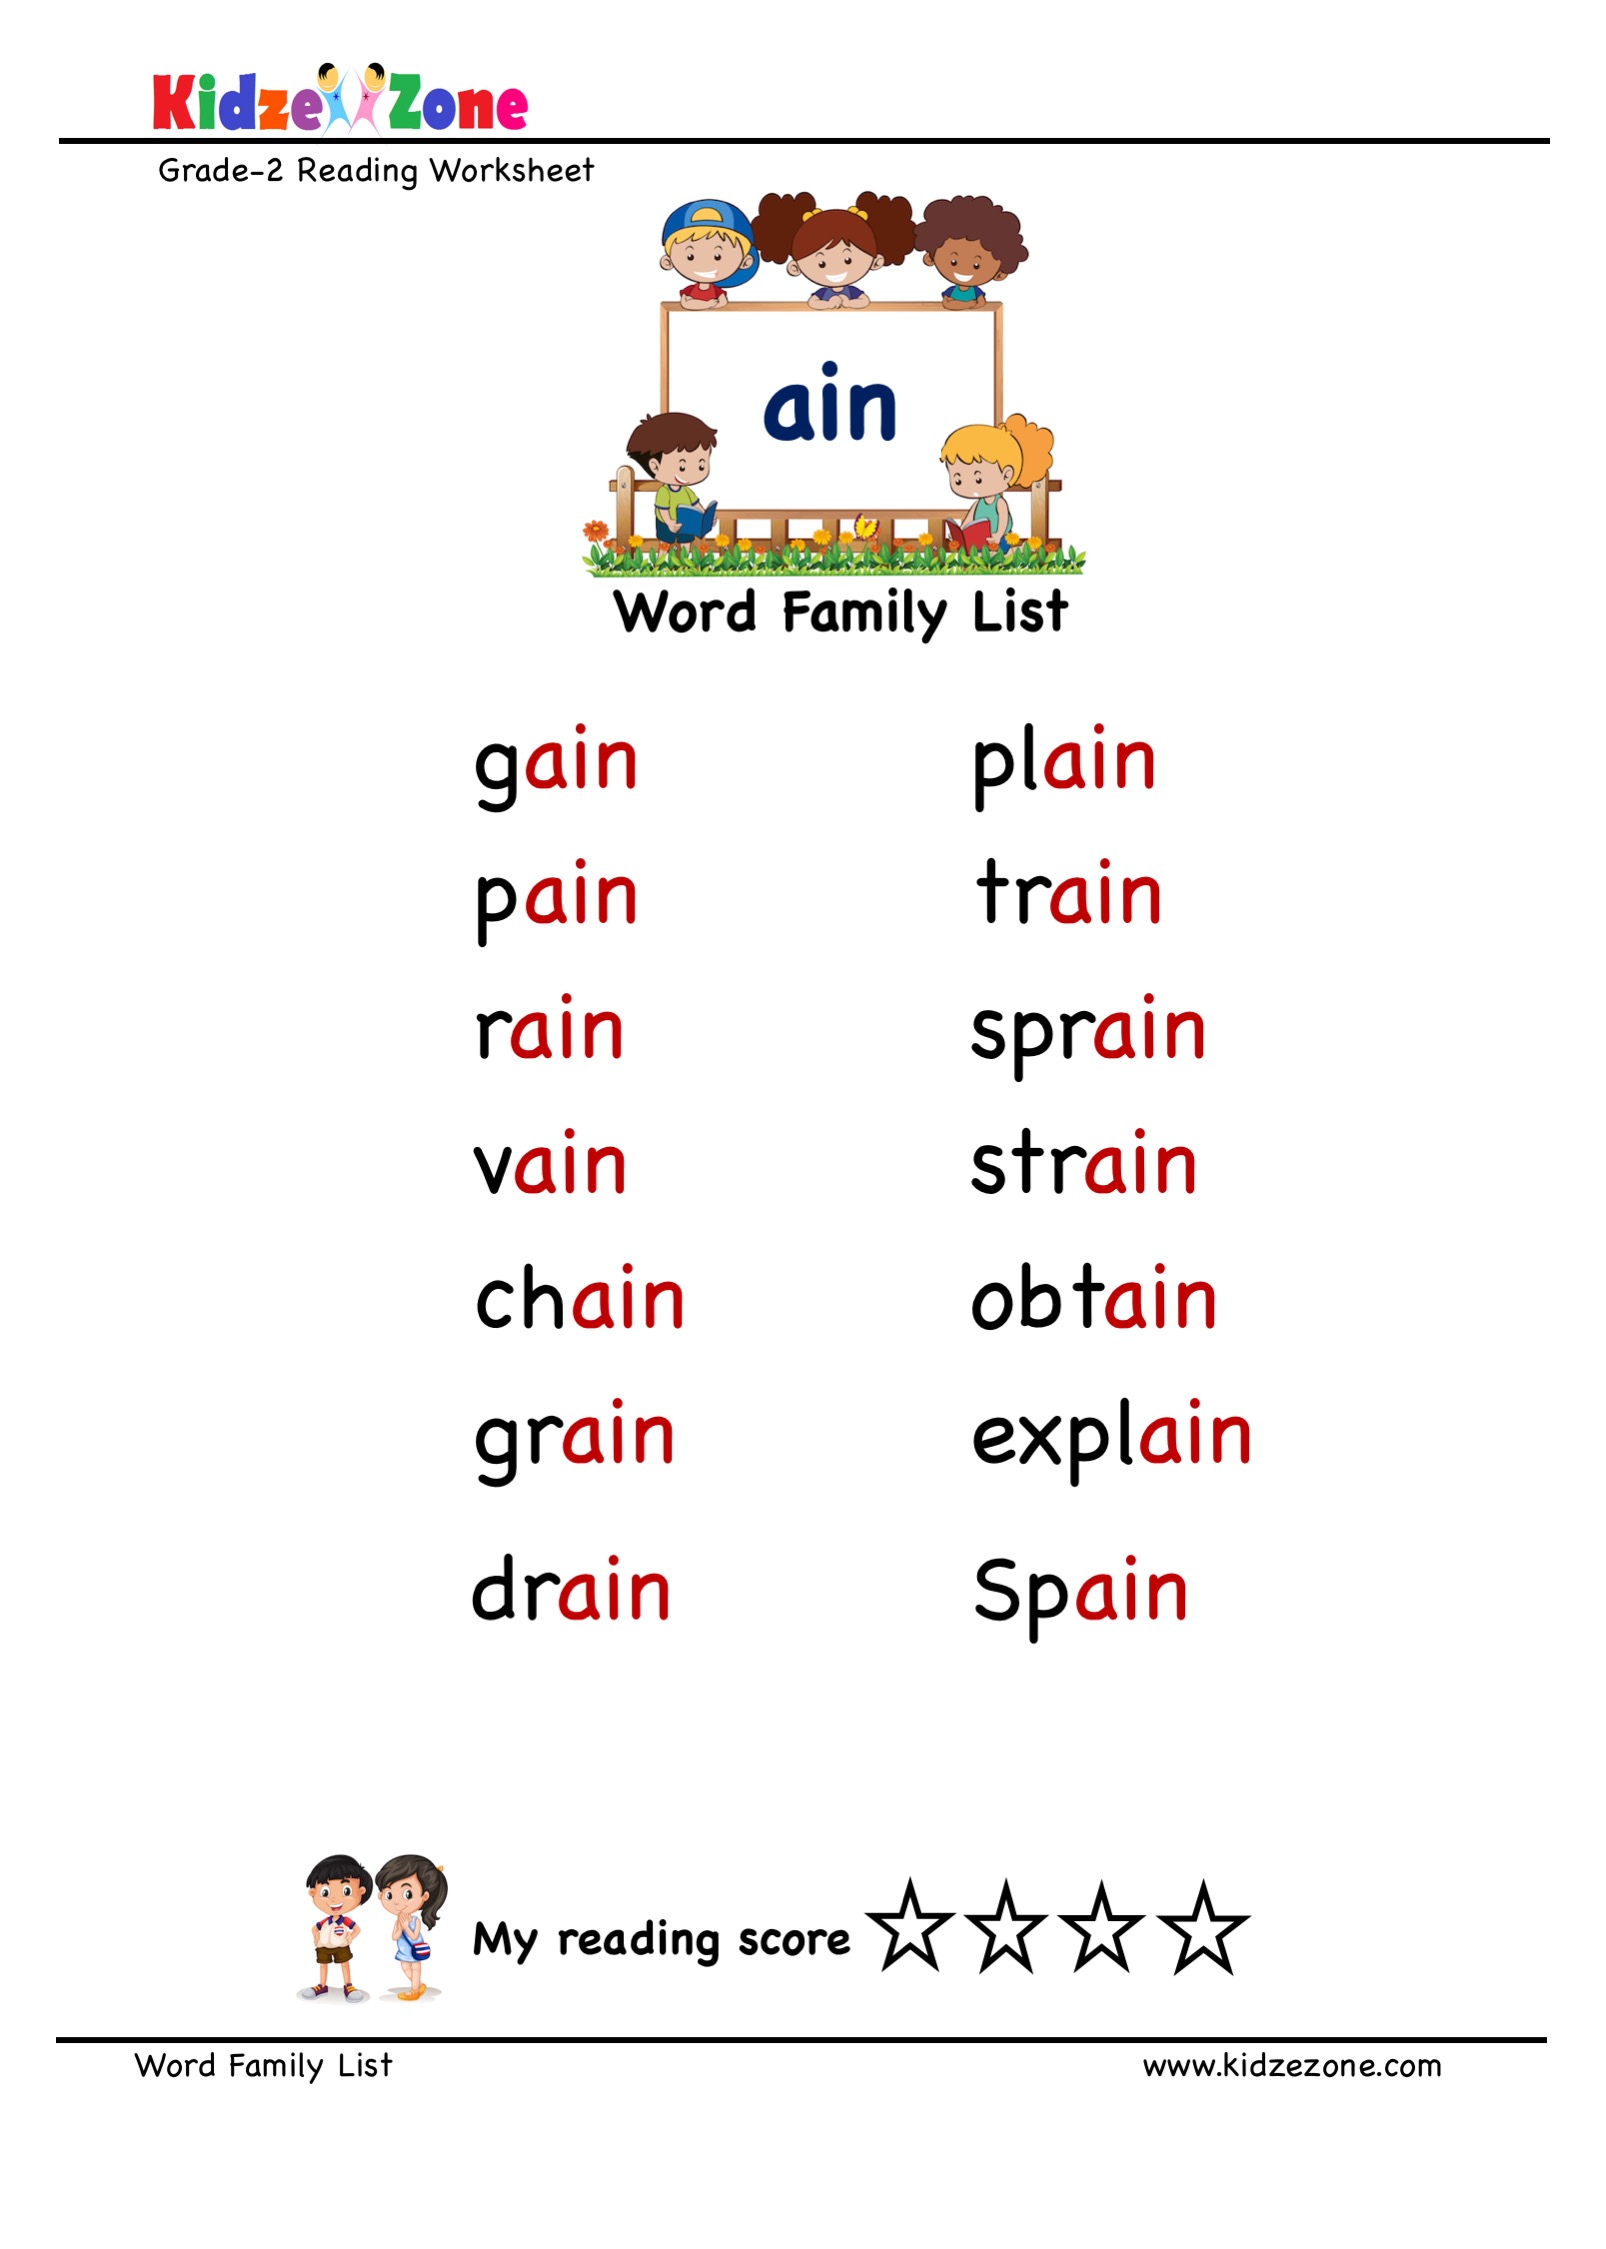 explore-and-learn-words-from-ain-word-family-with-word-list-worksheet